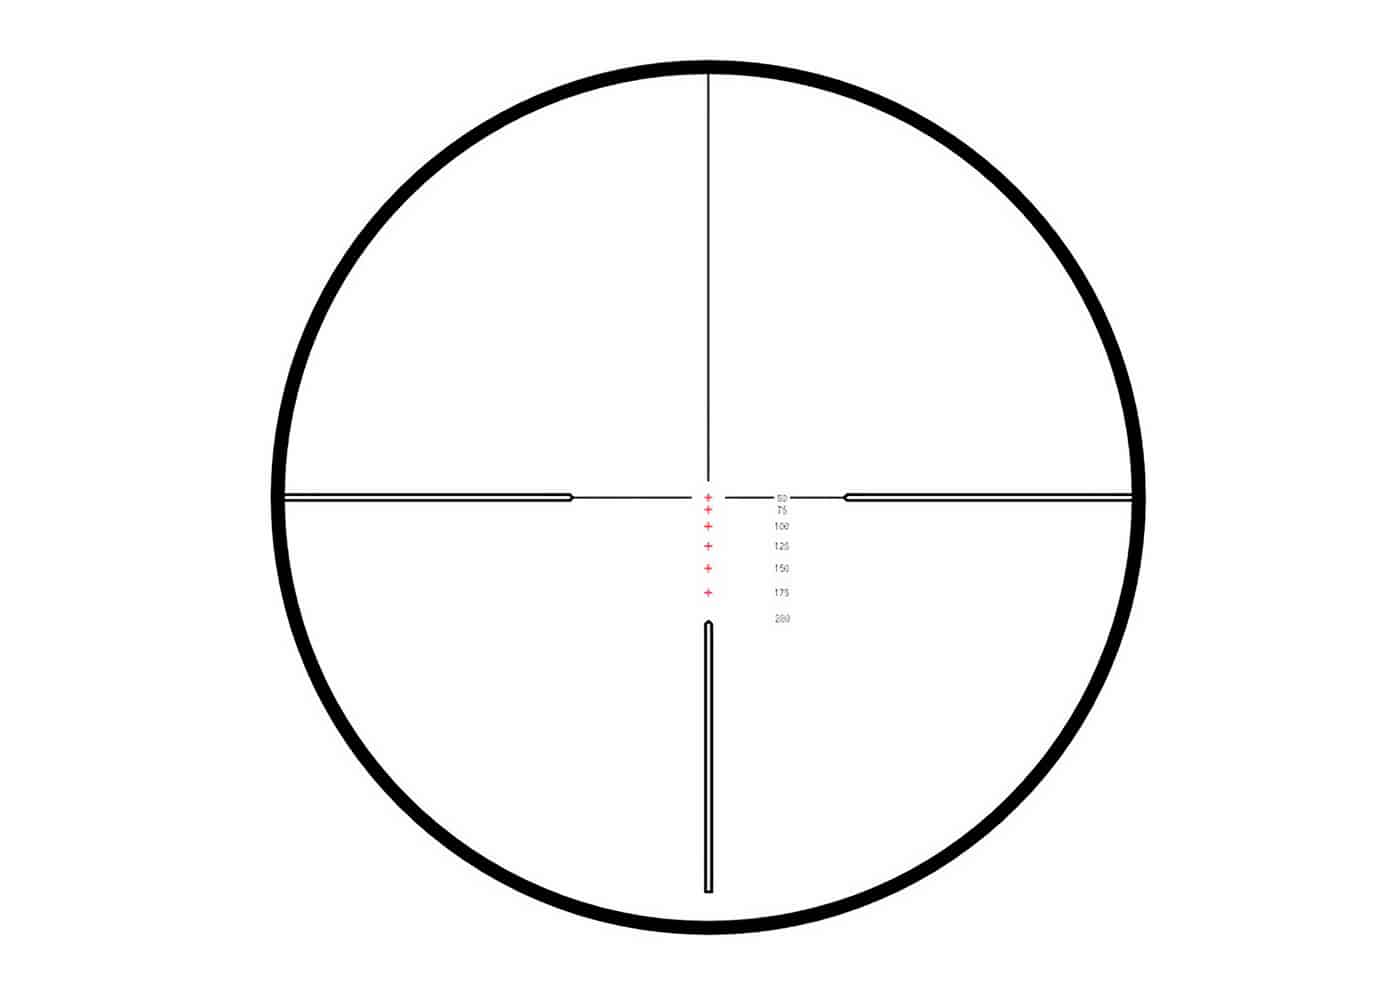 This illustration shows the Hawke Vantage rimfire reticle designed for for .22 Long Rifle ammunition.